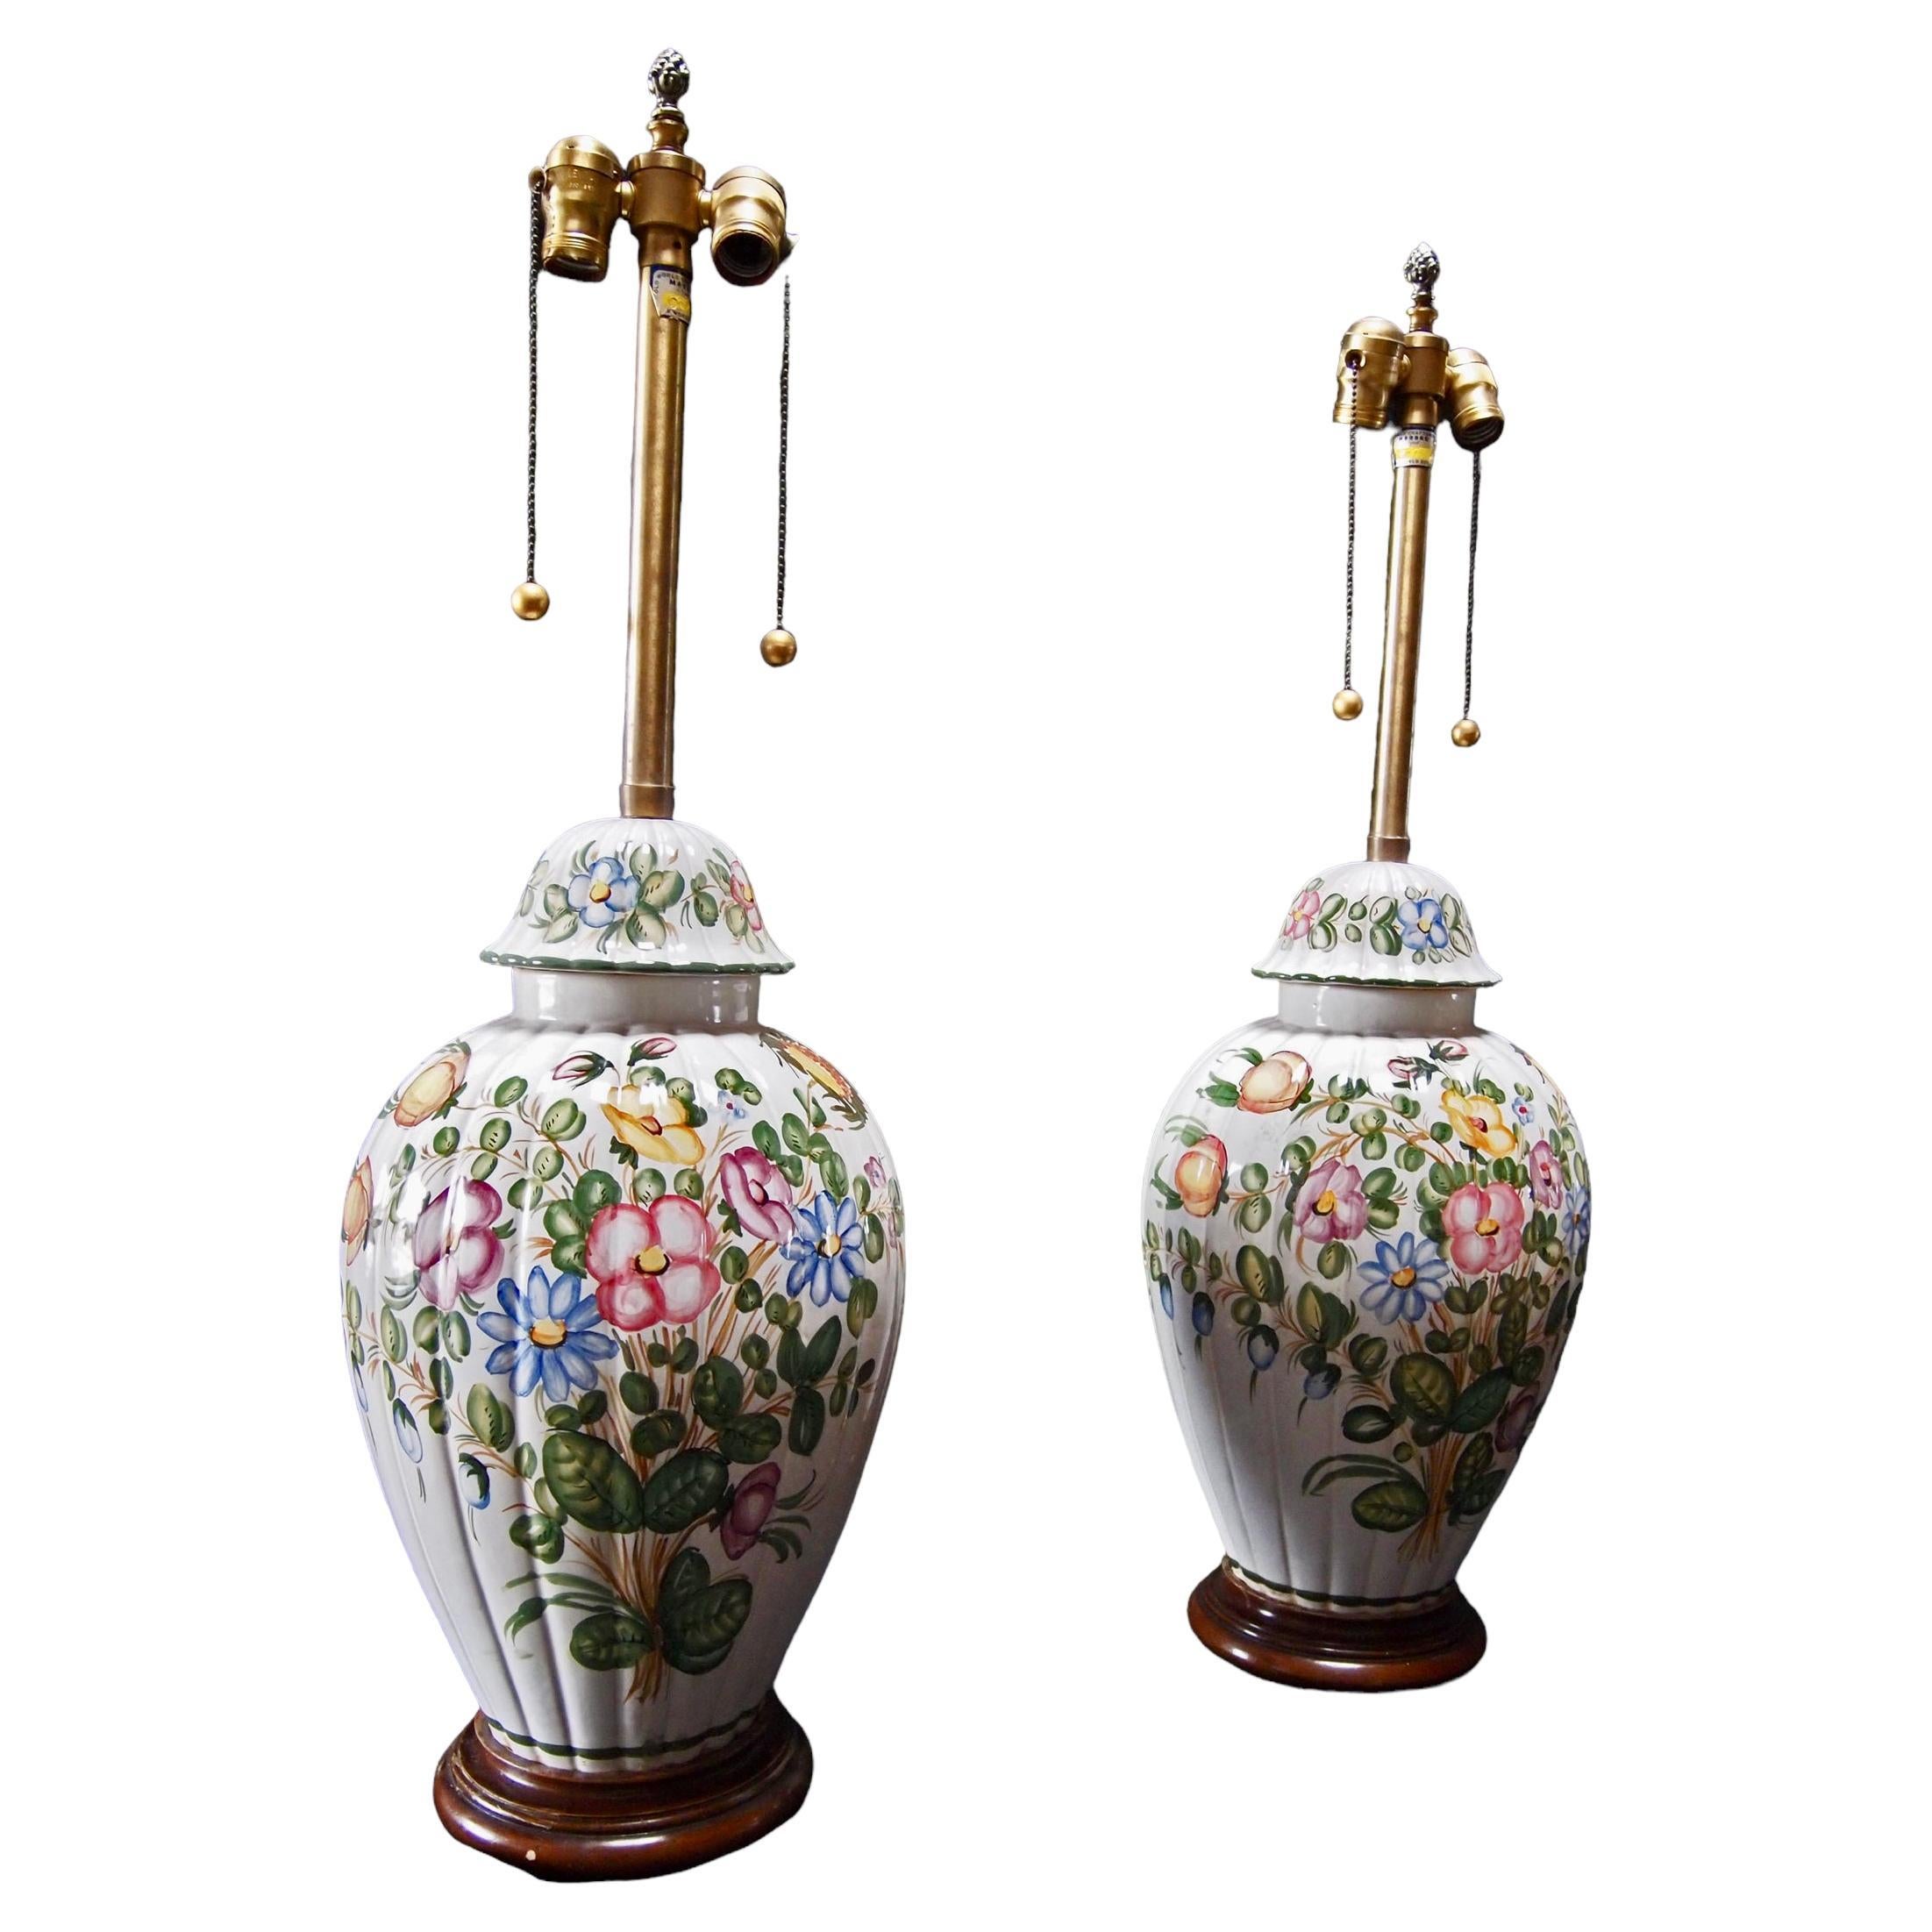 Pair of Large Floral Decorated Lamps Lamps by Marbro Lamp Co. For Sale